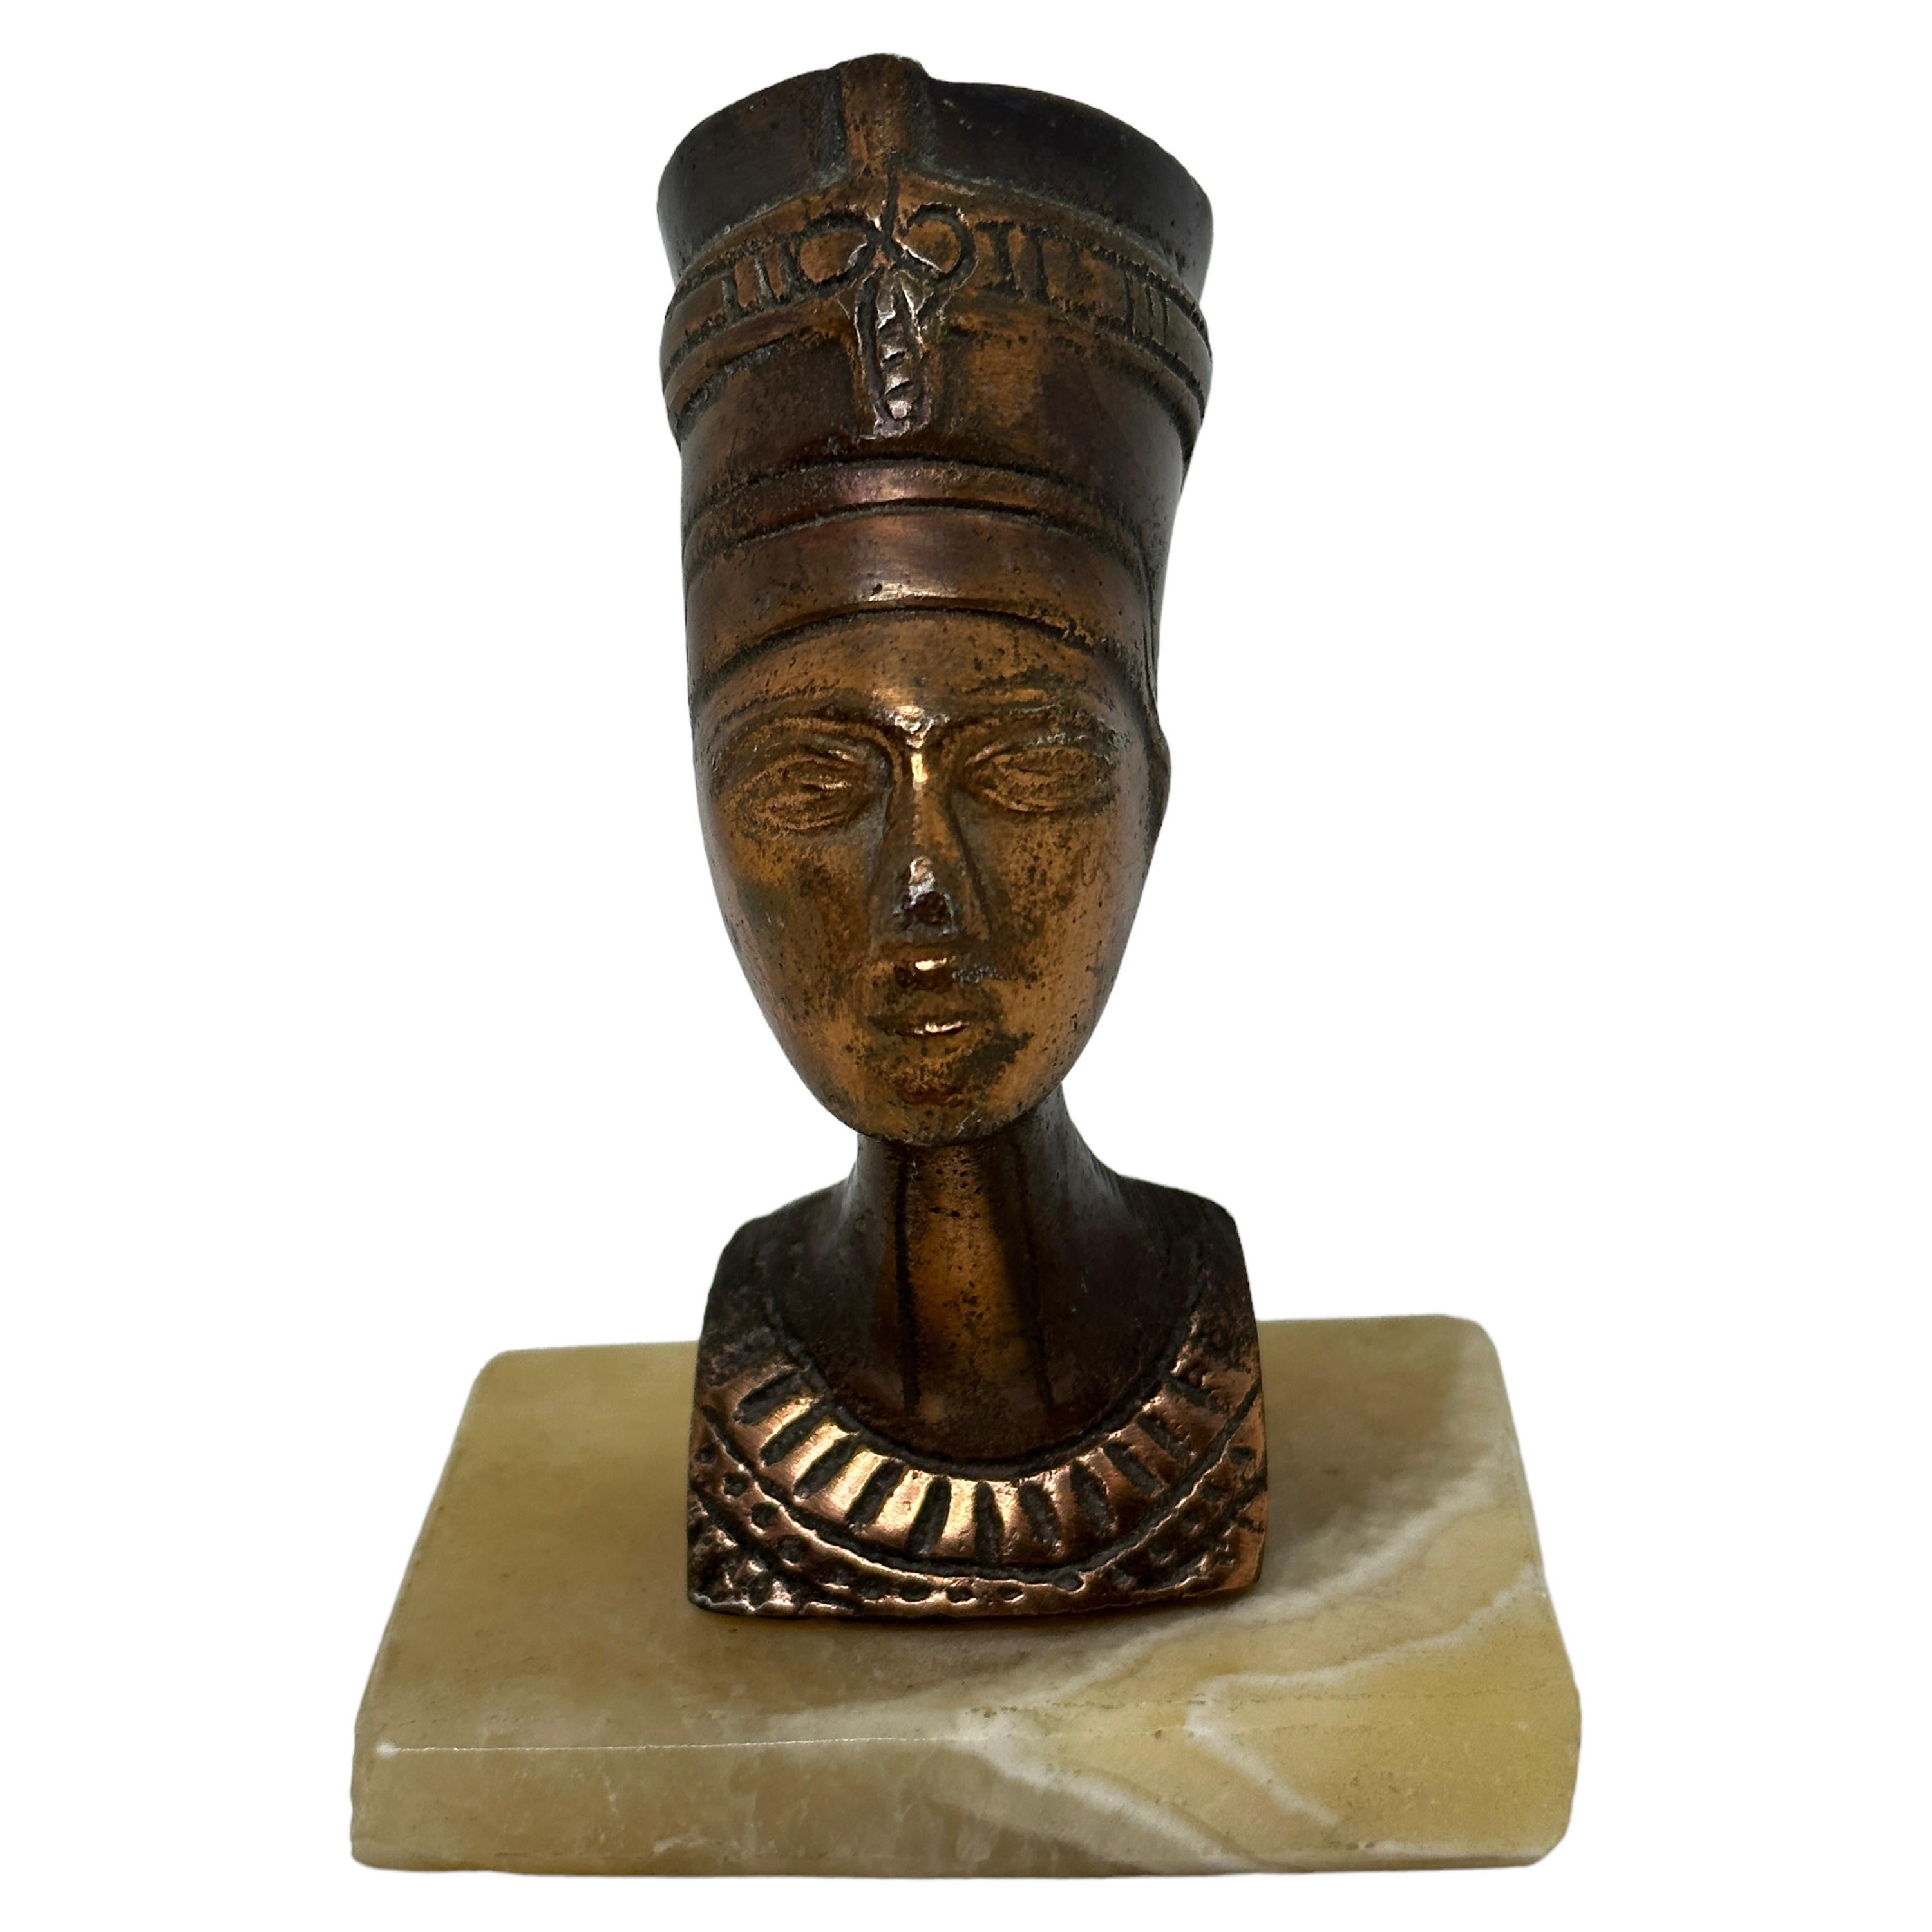 Vintage Decorative Nefertiti Egyptian Queen Bust Statue on Marble Base